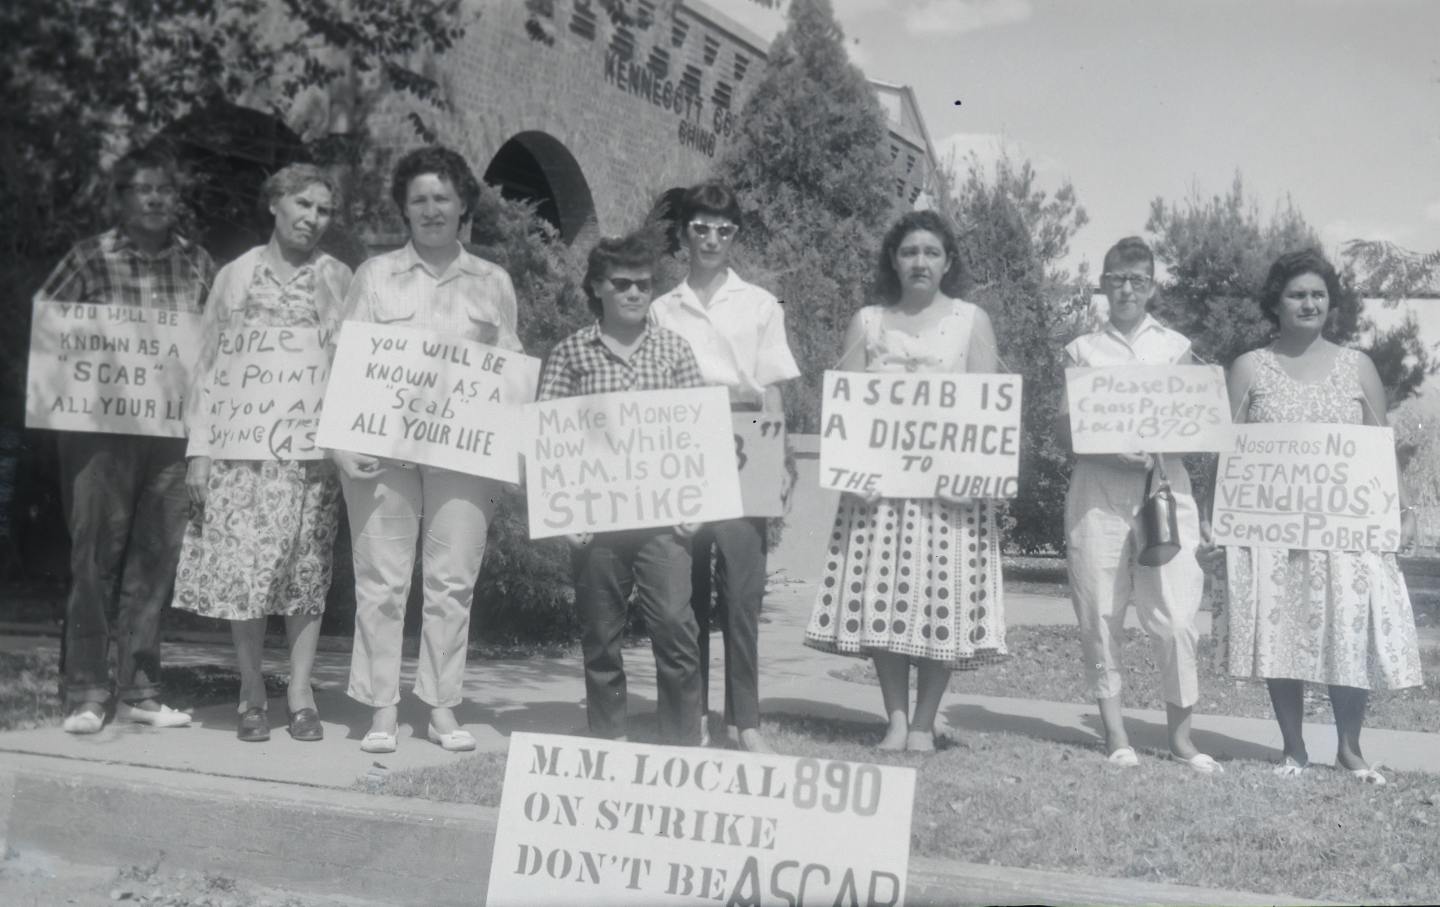 Women's Equality Day: The History of When Women Went on Strike